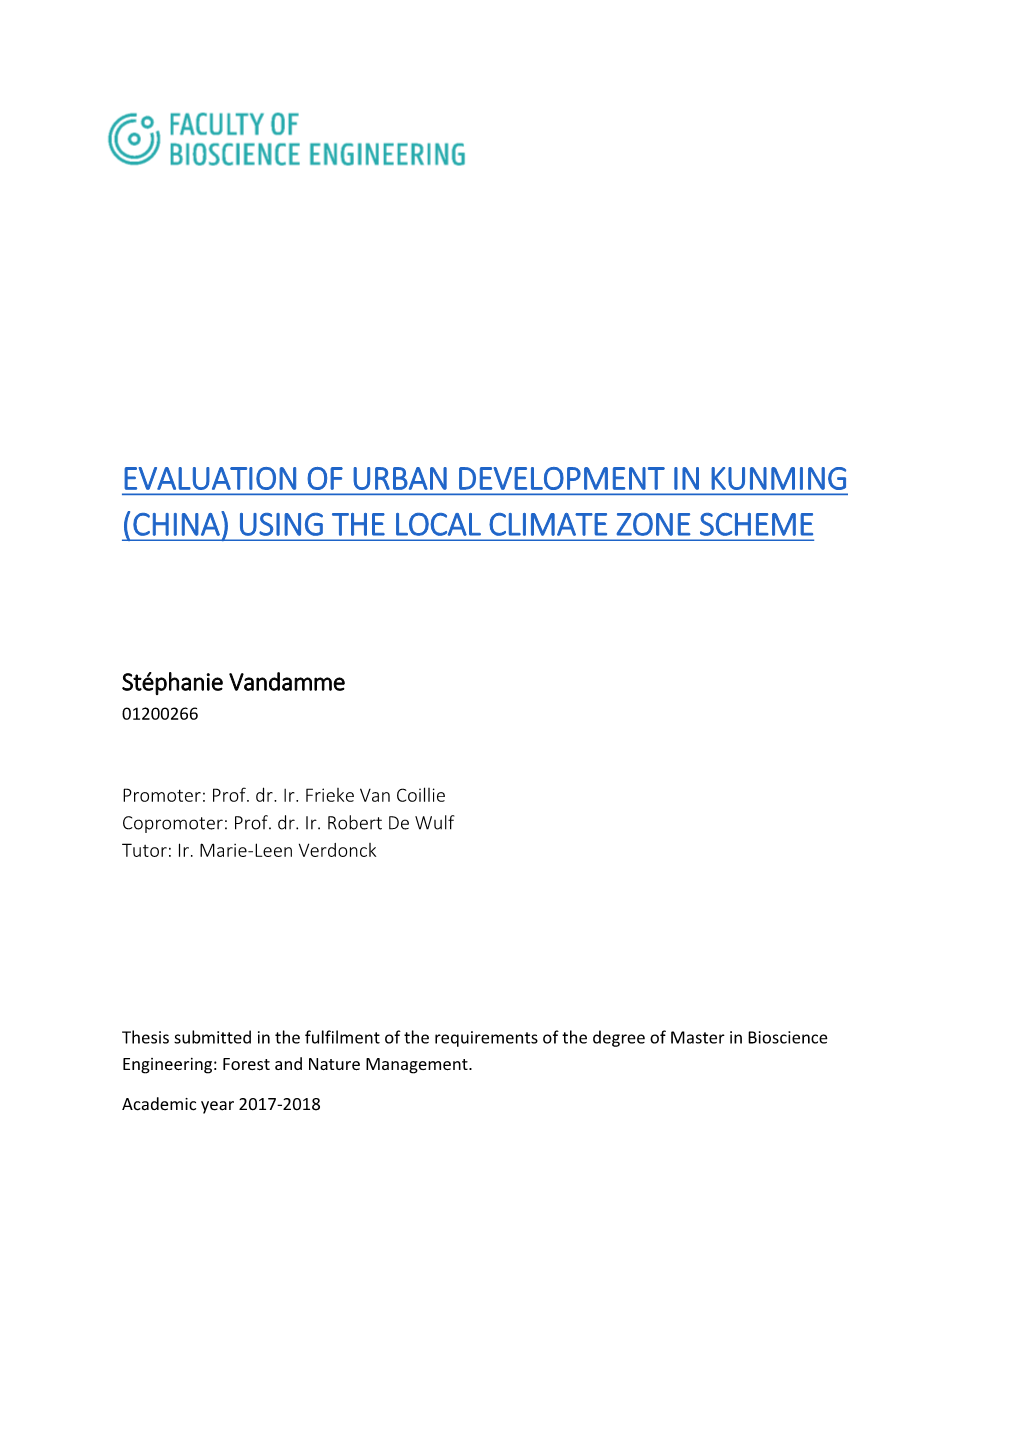 Evaluation of Urban Development in Kunming (China) Using the Local Climate Zone Scheme